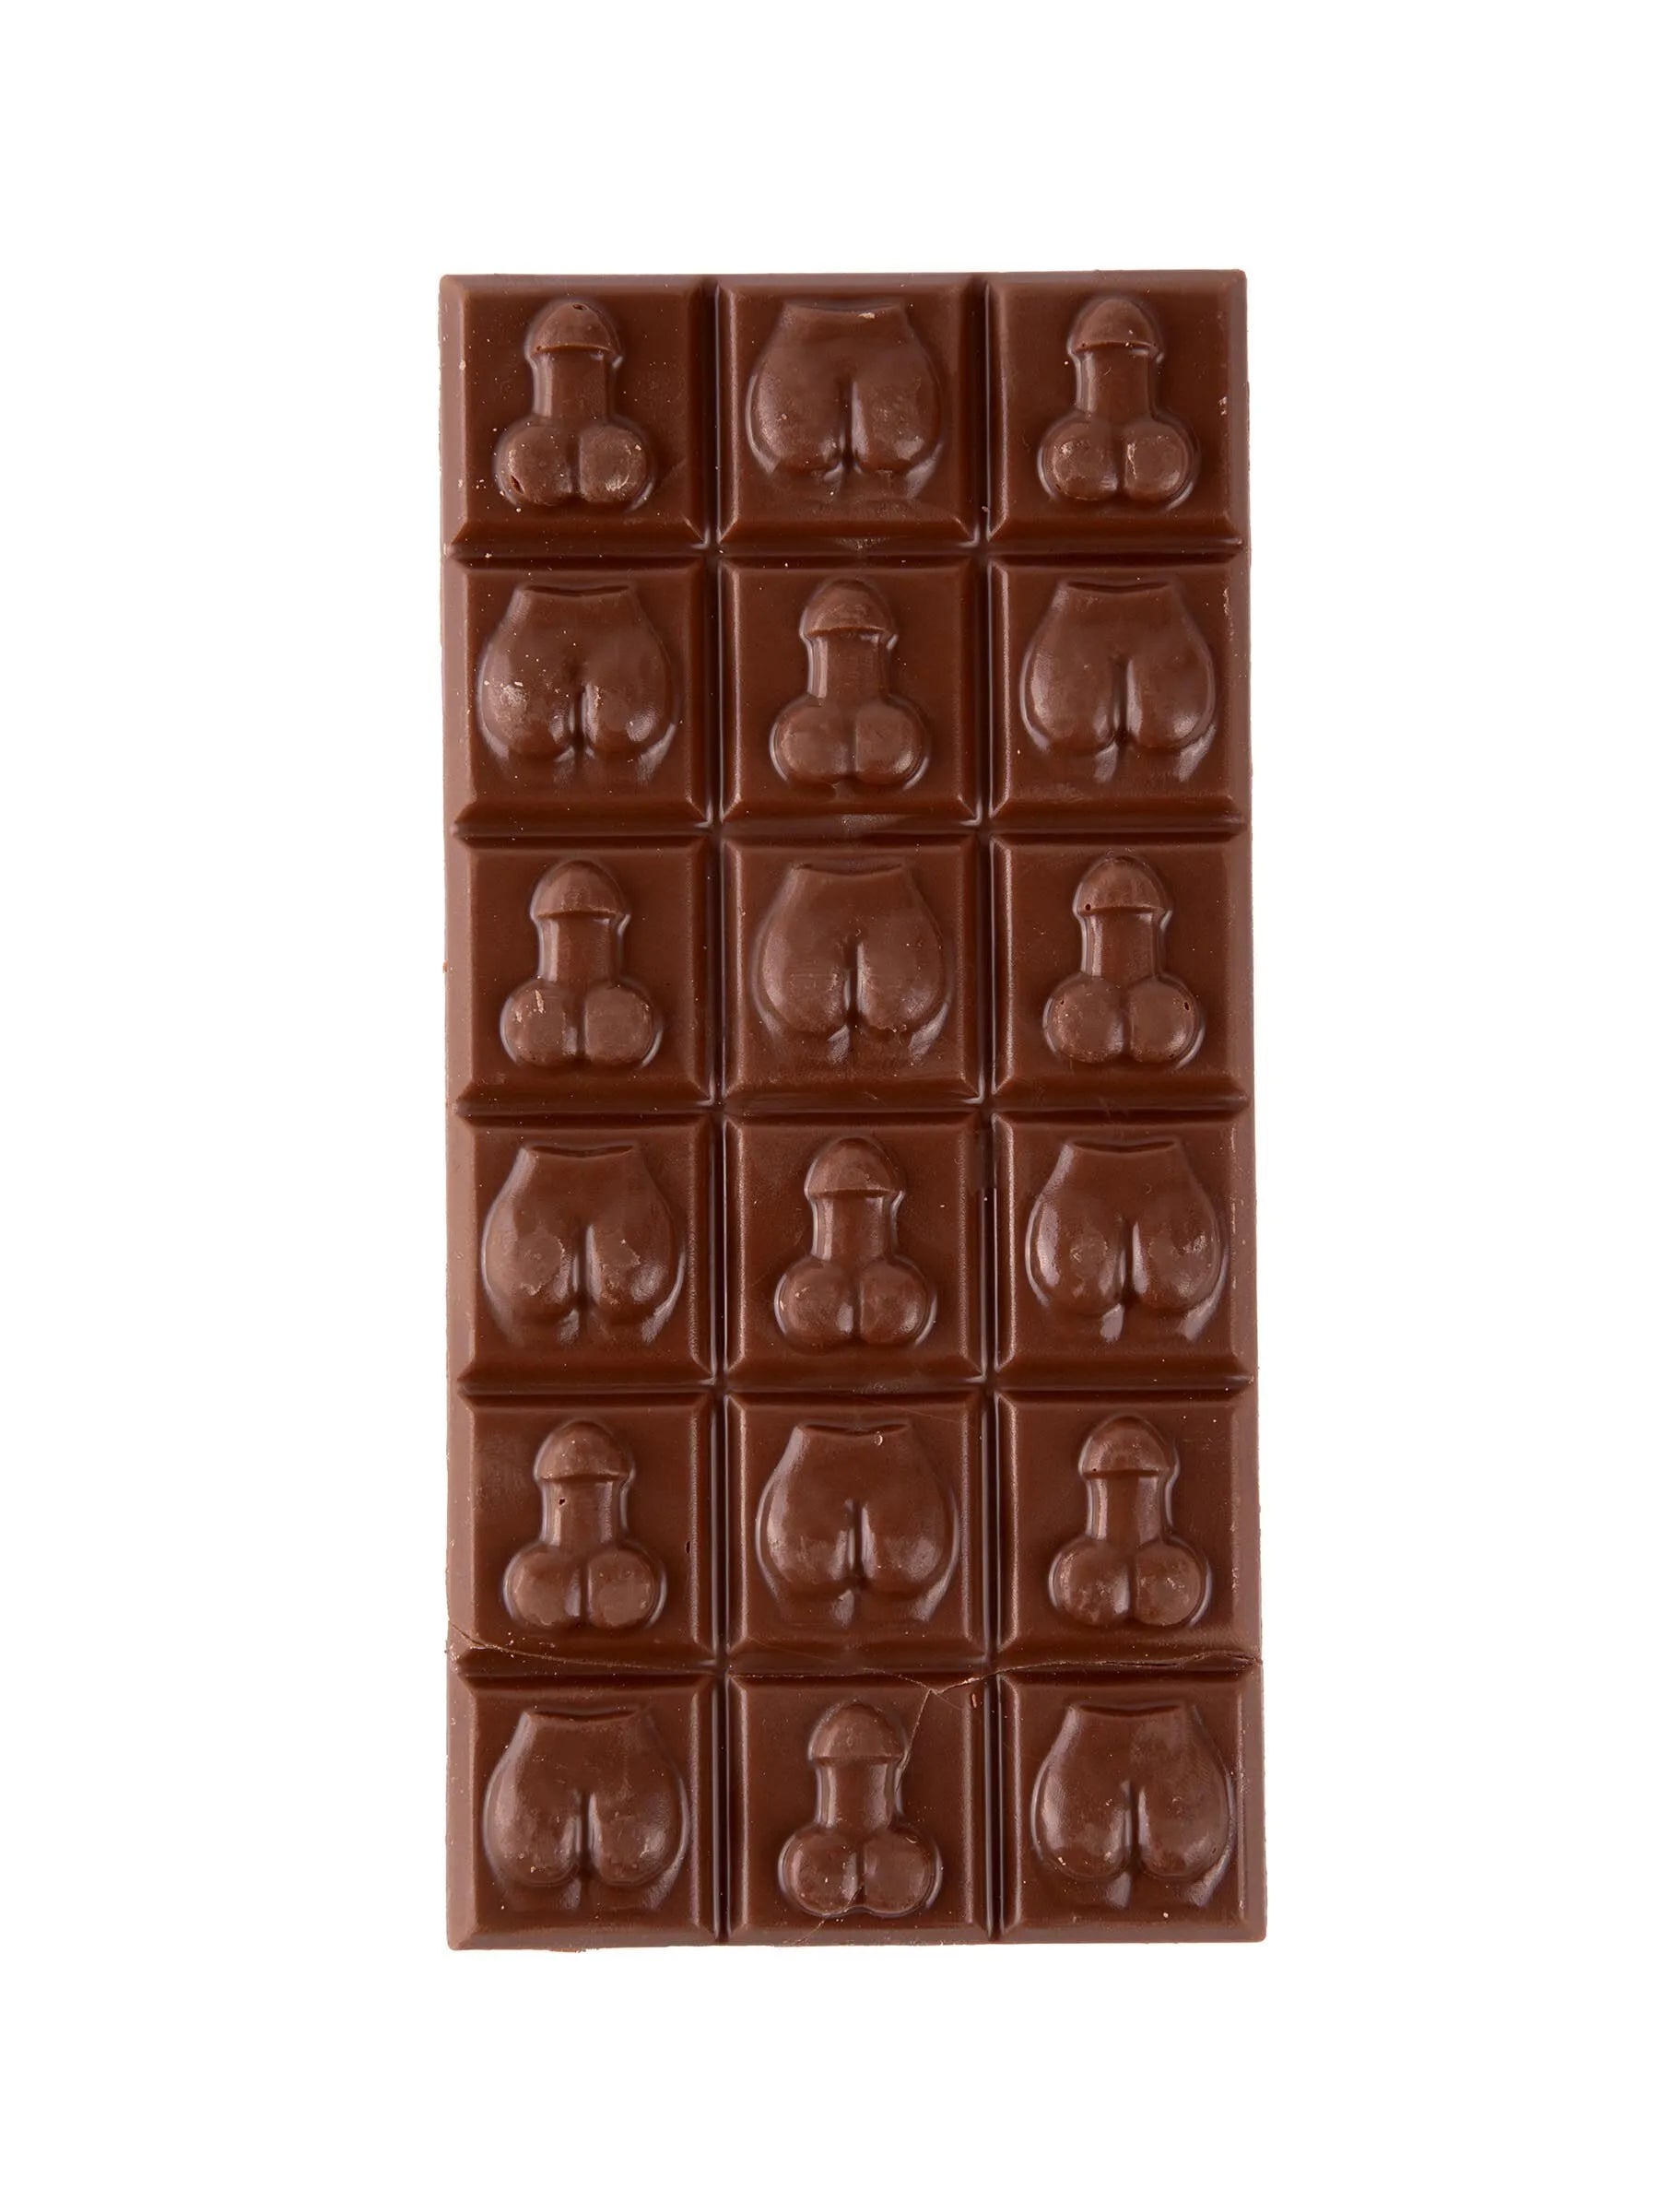 Milk Chocolate Bum and Willies Bar From Ann Summers, Image 02